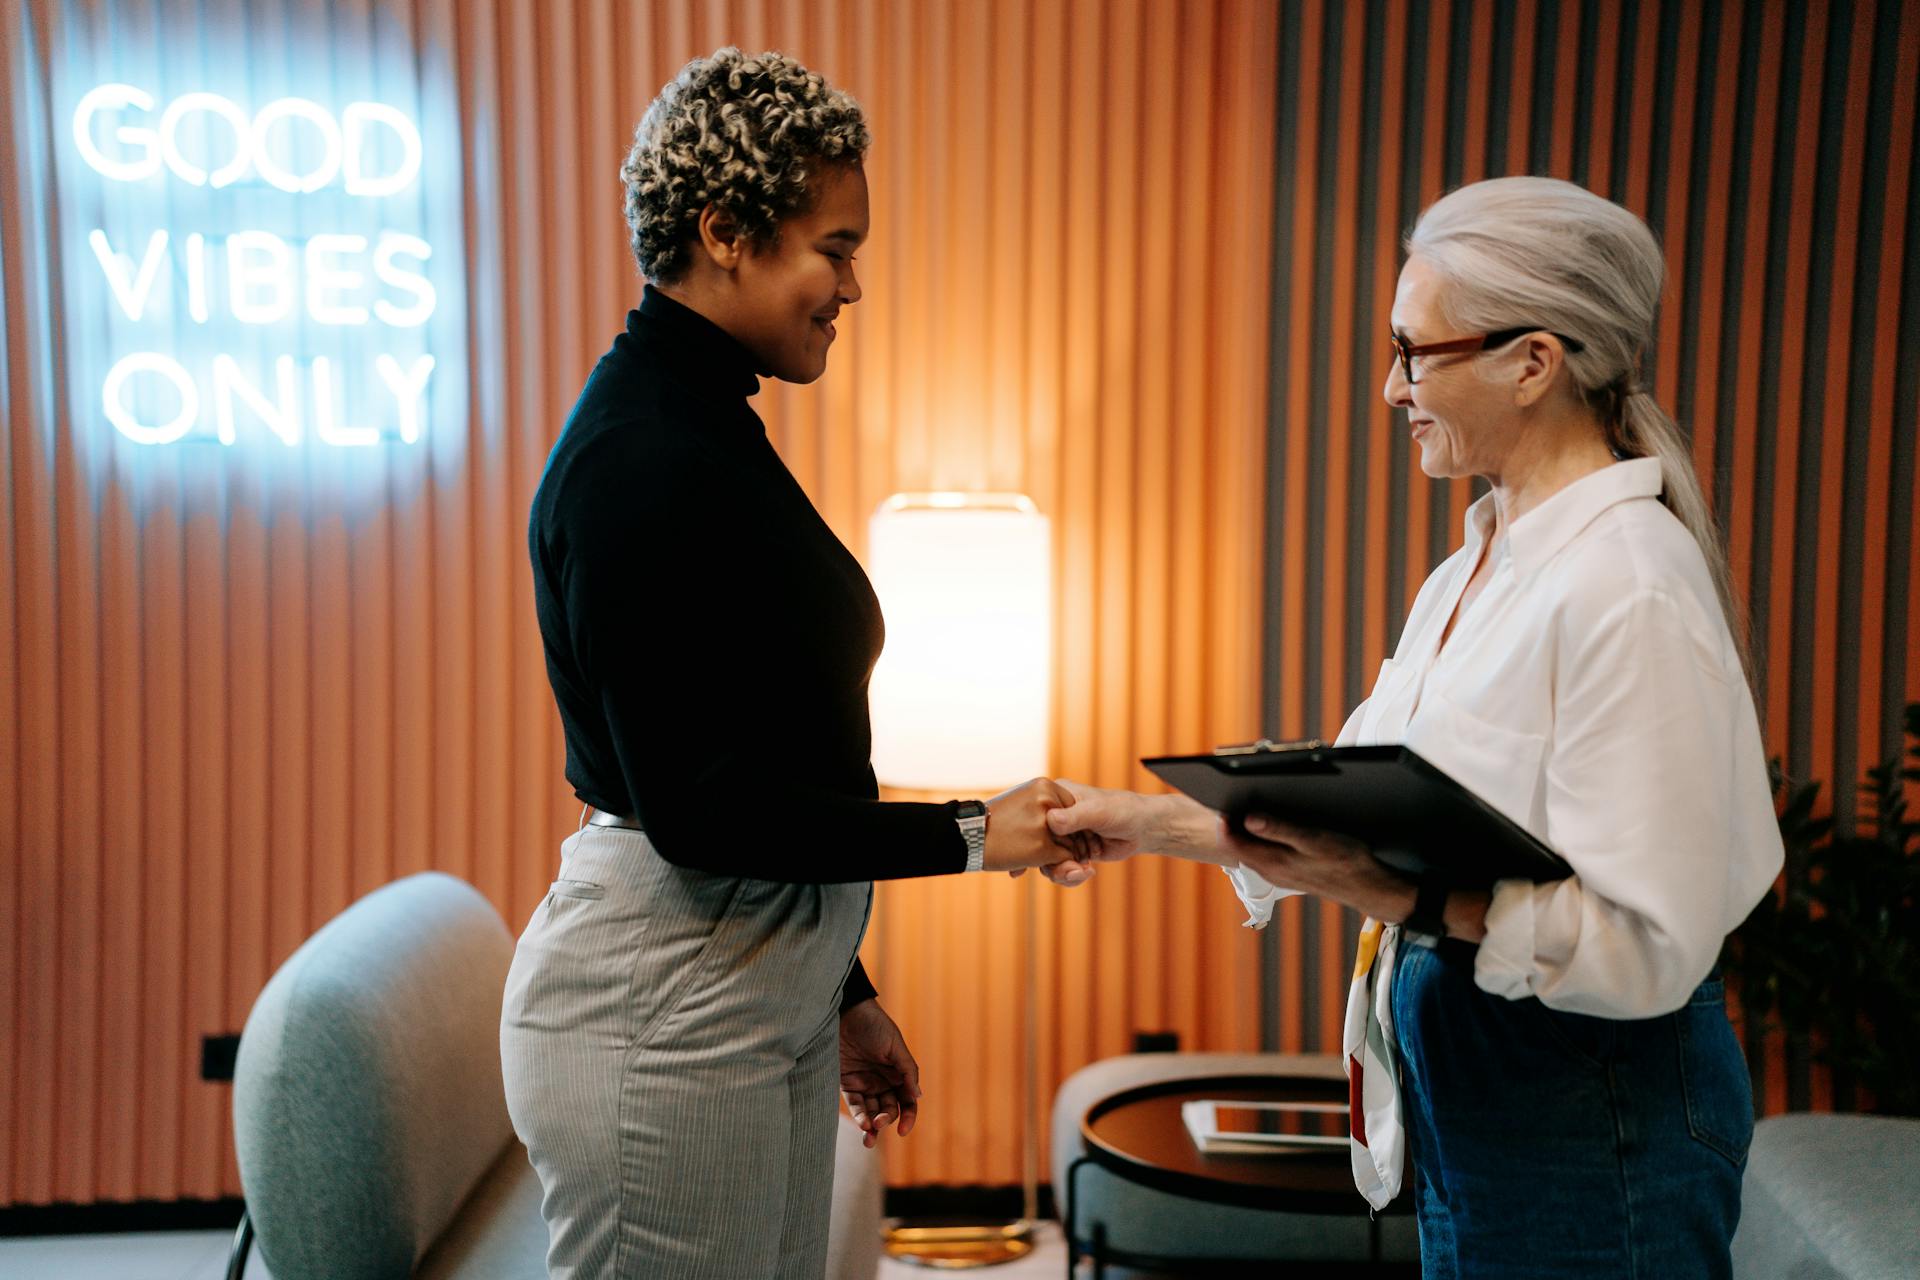 A woman interviewing another woman for a position